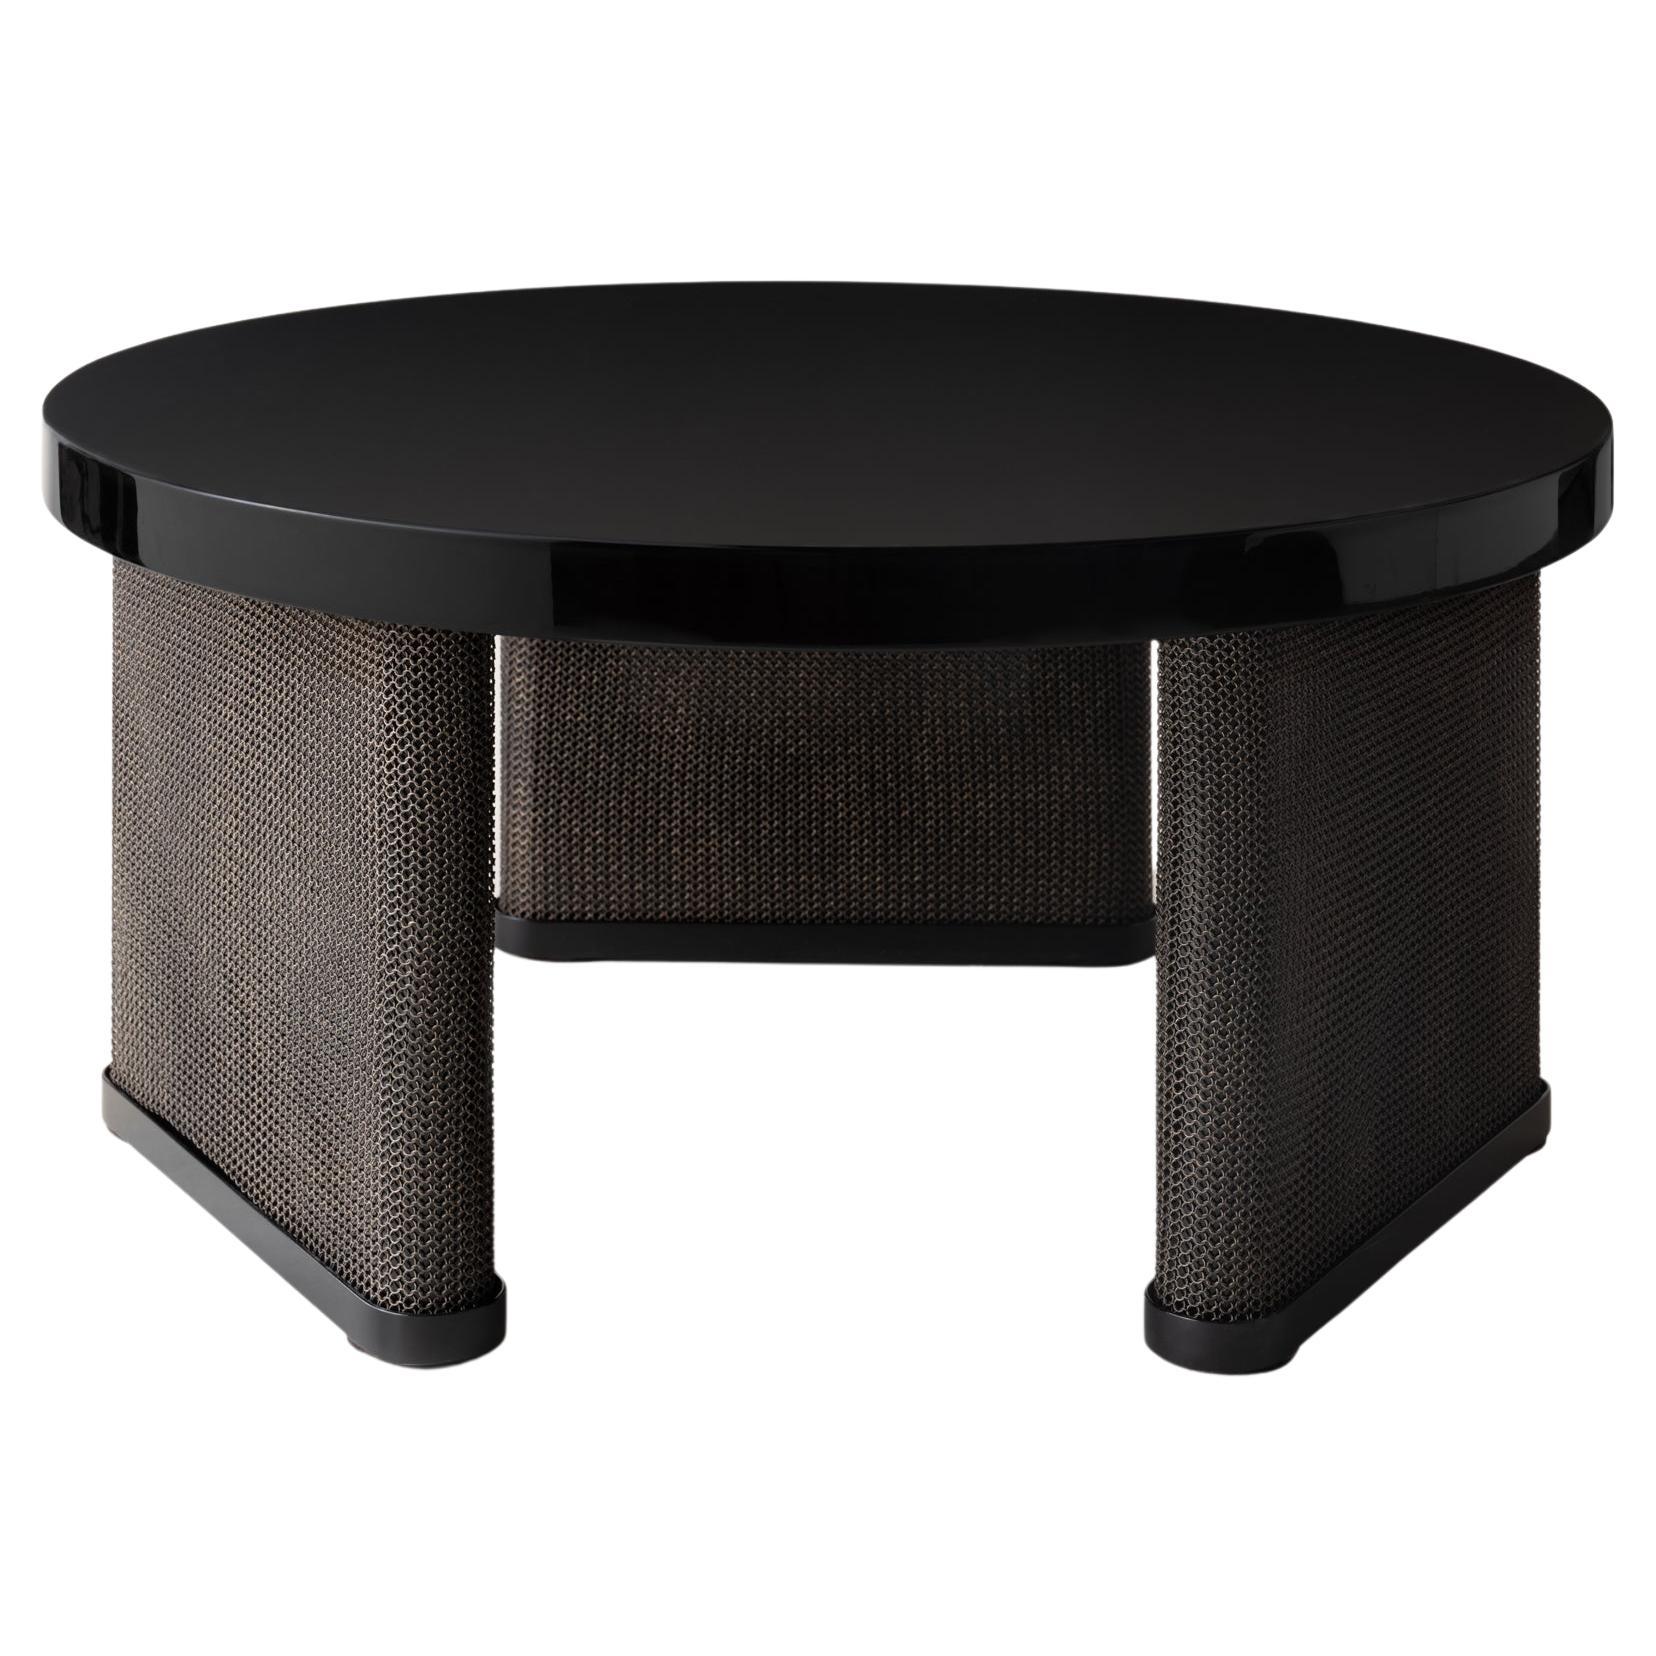 Konekt Armor Coffee Table Round with High Gloss Finish and Chainmail For Sale